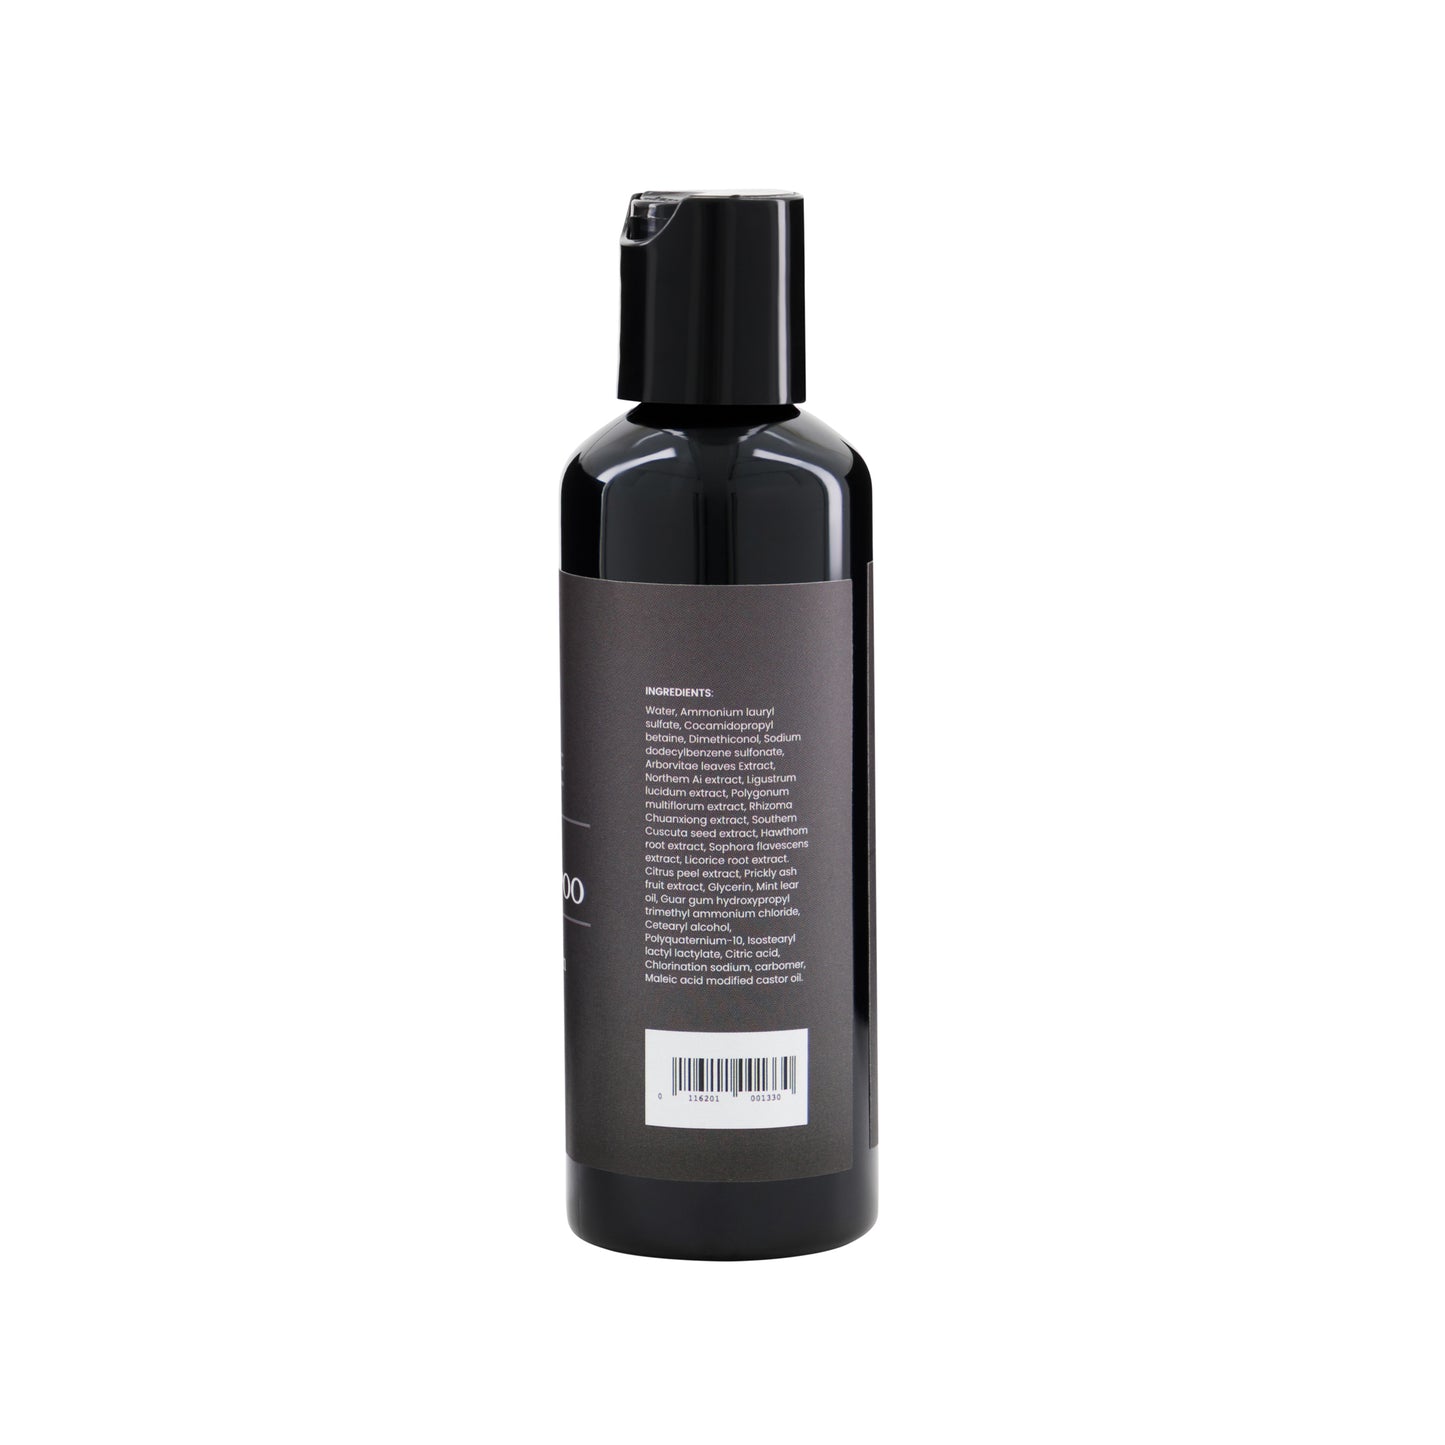 Mirakelle - Organic Beard Shampoo, supports Healthy Growth with all natural ingredients